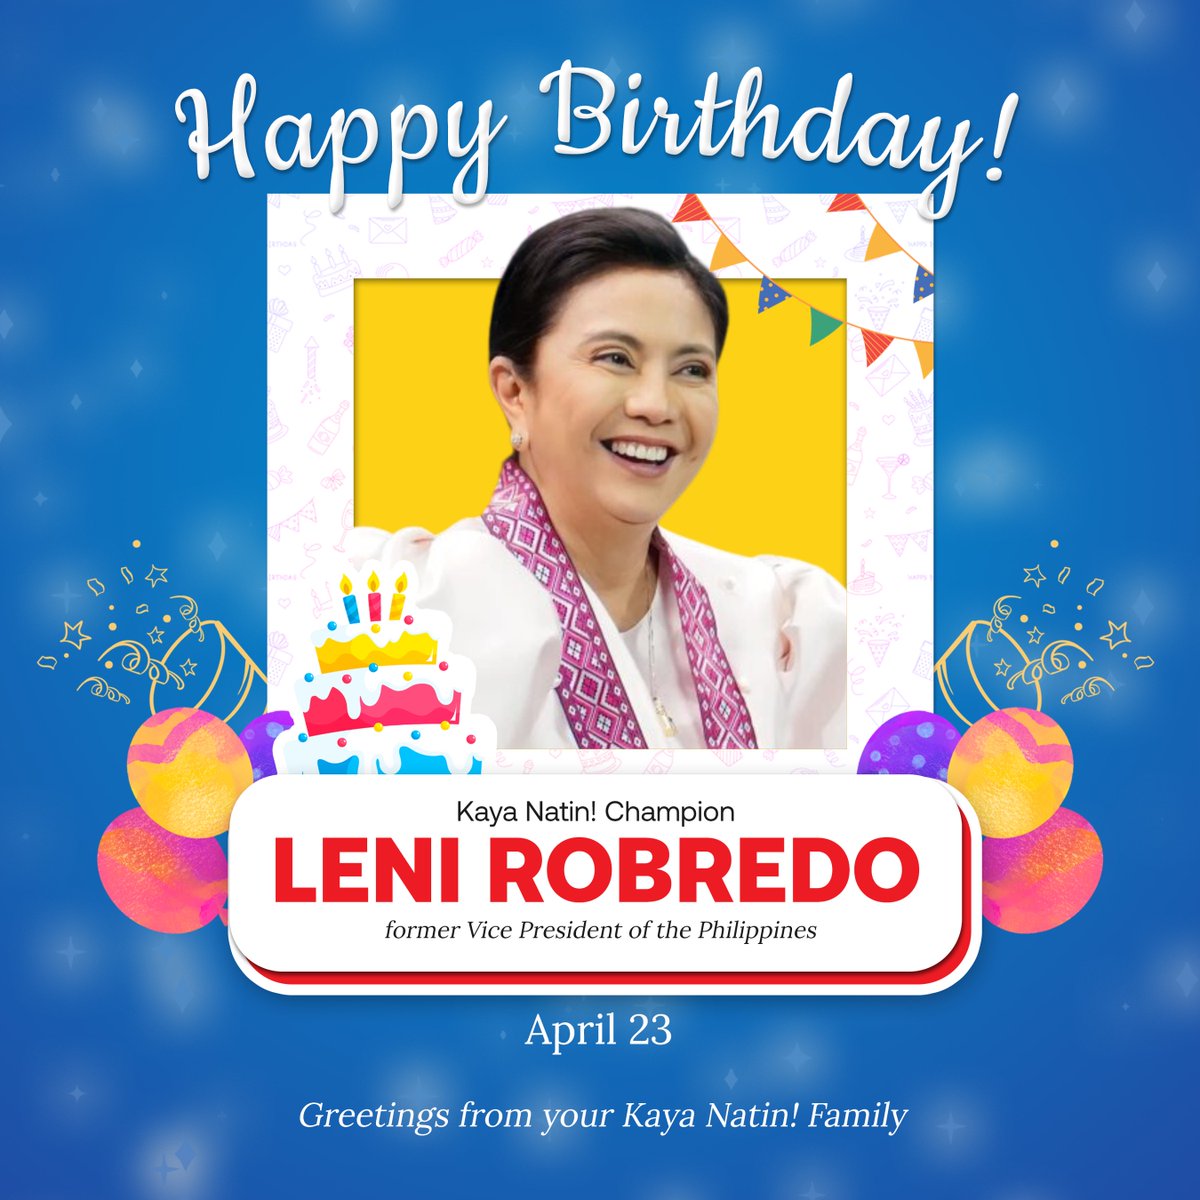 Happy Birthday to our Kaya Natin Champion, former VP Leni Robredo! 🥰❤️ We thank you for your exemplary leadership and being an inspiration in lighting up the path for those who believe in good governance. May you have many more years of happiness, good health, and blessings!